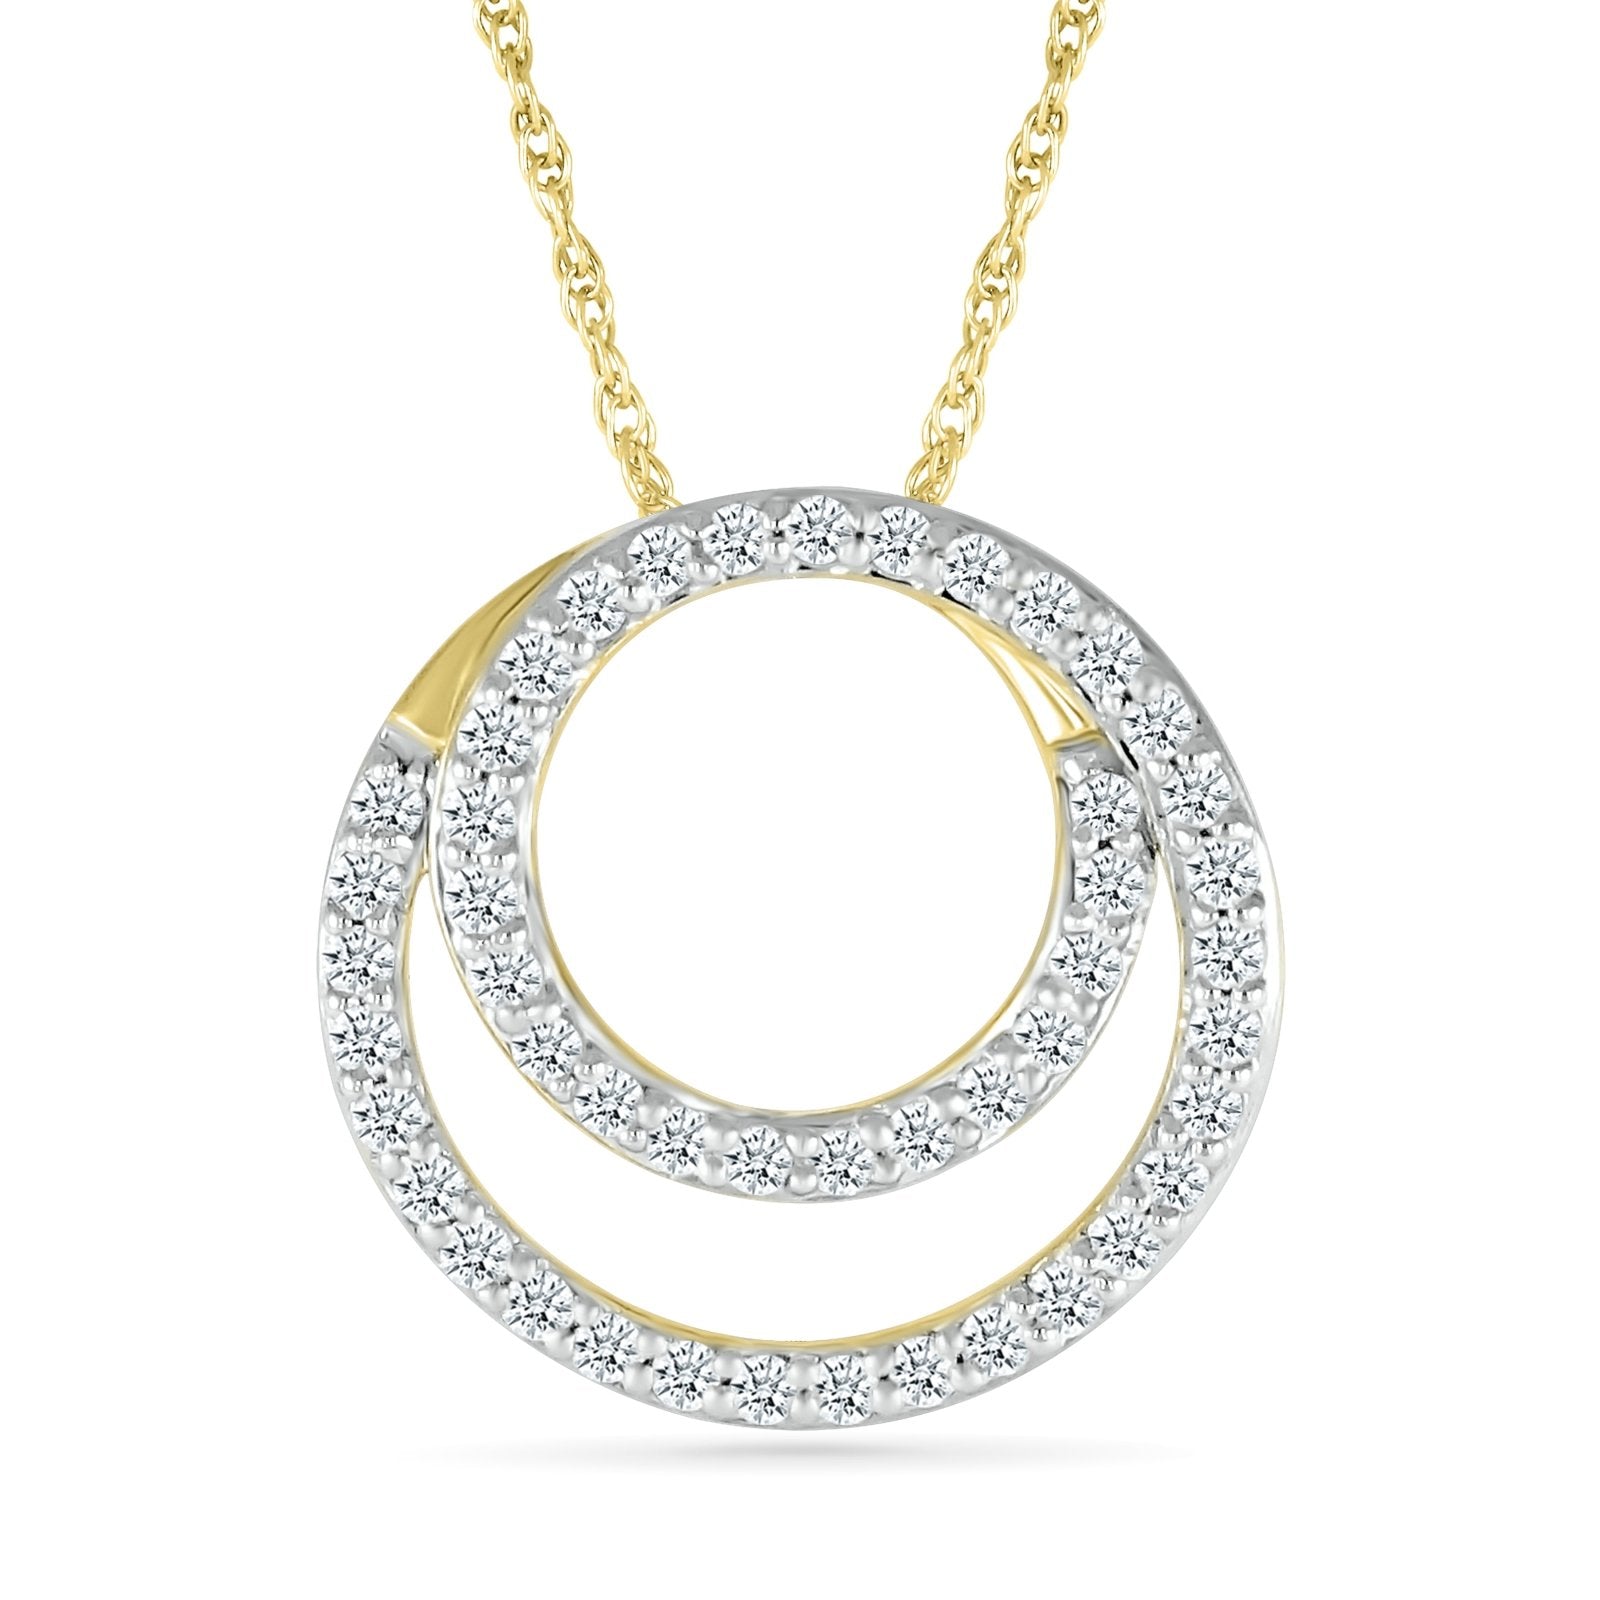 Double Circle Diamond Necklace Necklaces Estella Collection 32742 Diamond Yellow Gold #tag4# #tag5# #tag6# #tag7# #tag8# #tag9# #tag10#